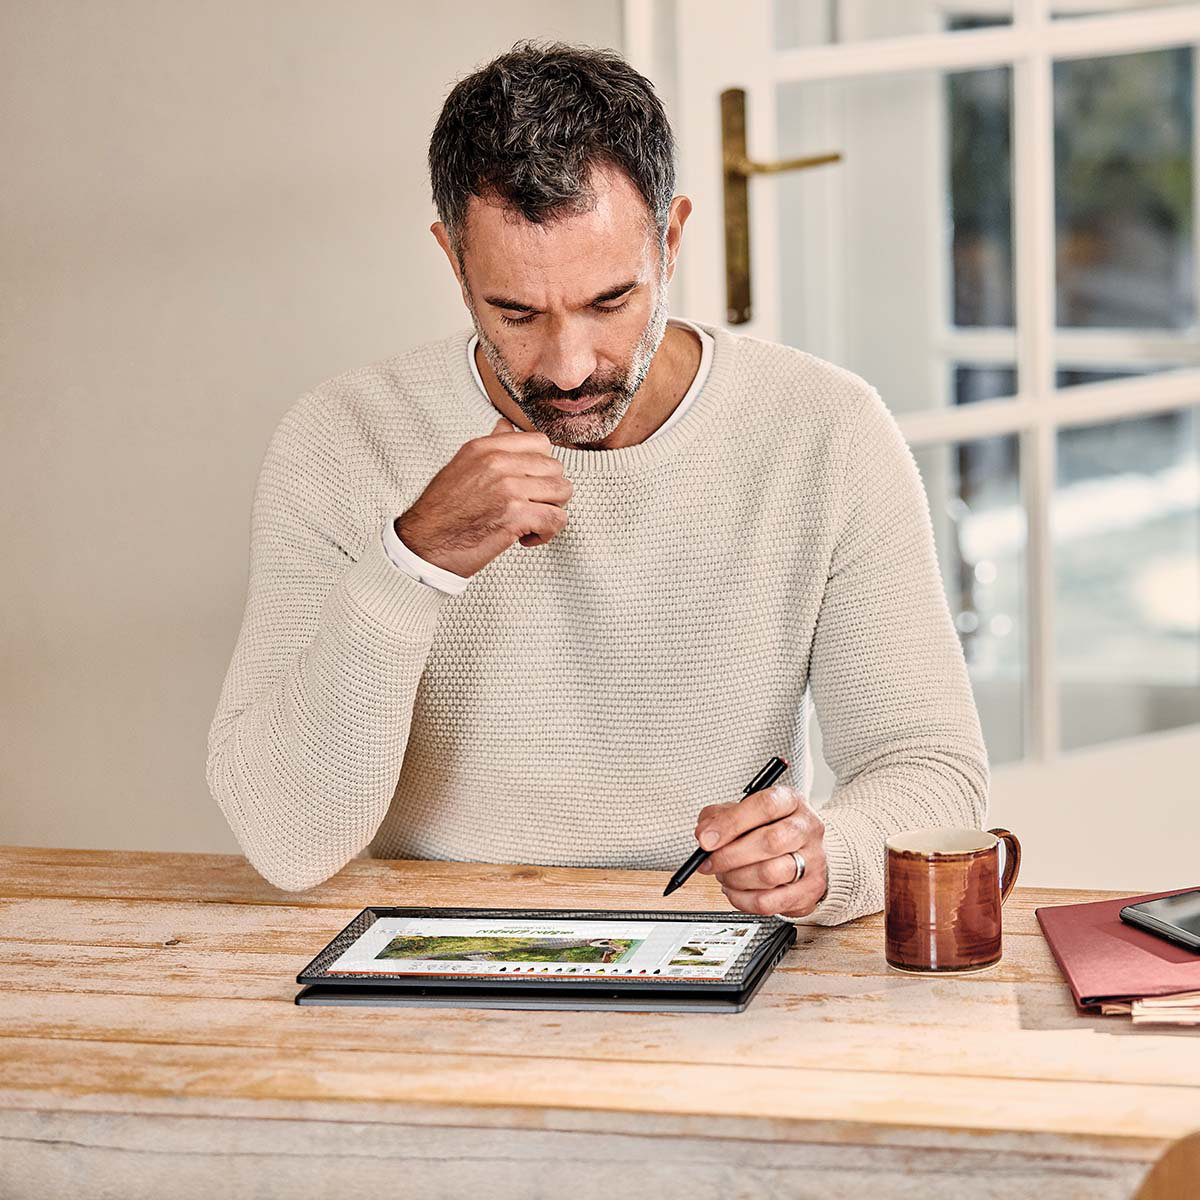 A Male business owner working at home desk on his tablet